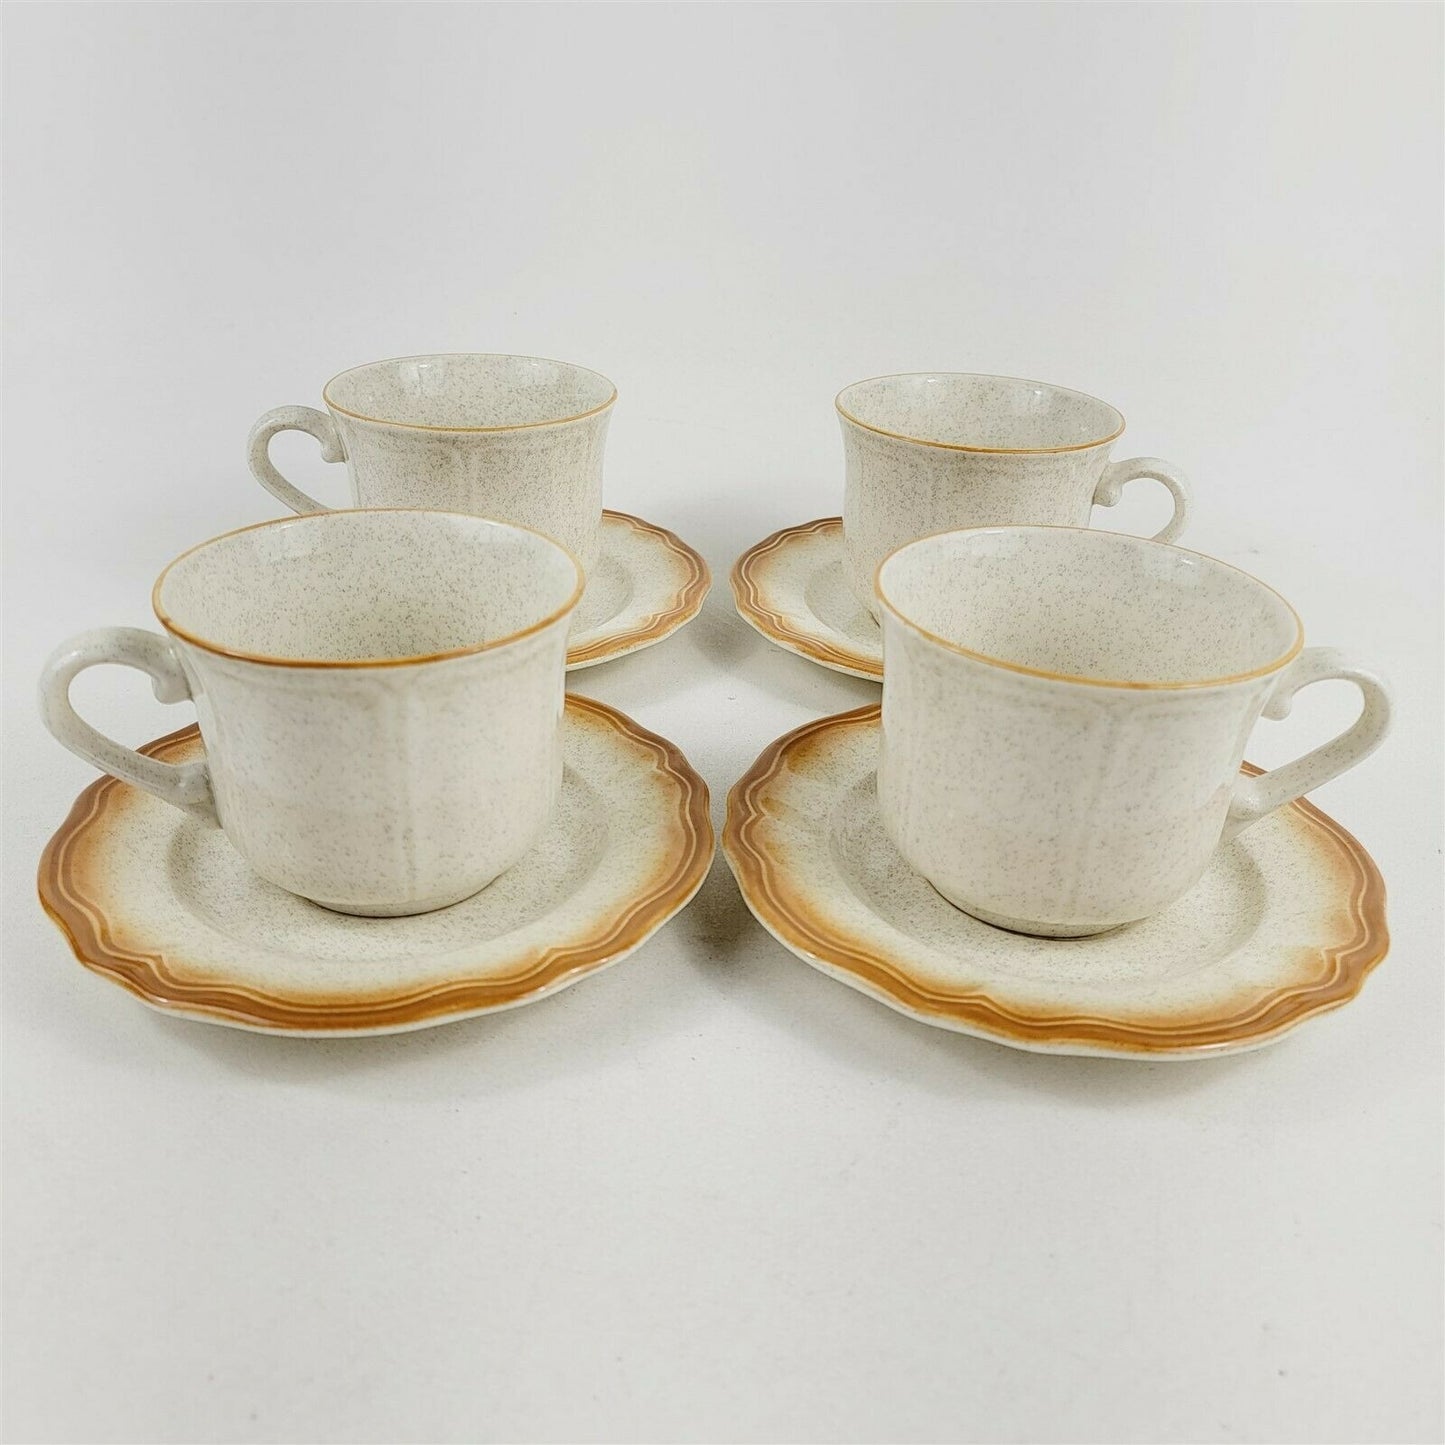 Vintage Meadowland Ironstone Daisy Wheat 4 Sets of Teacups & Saucers